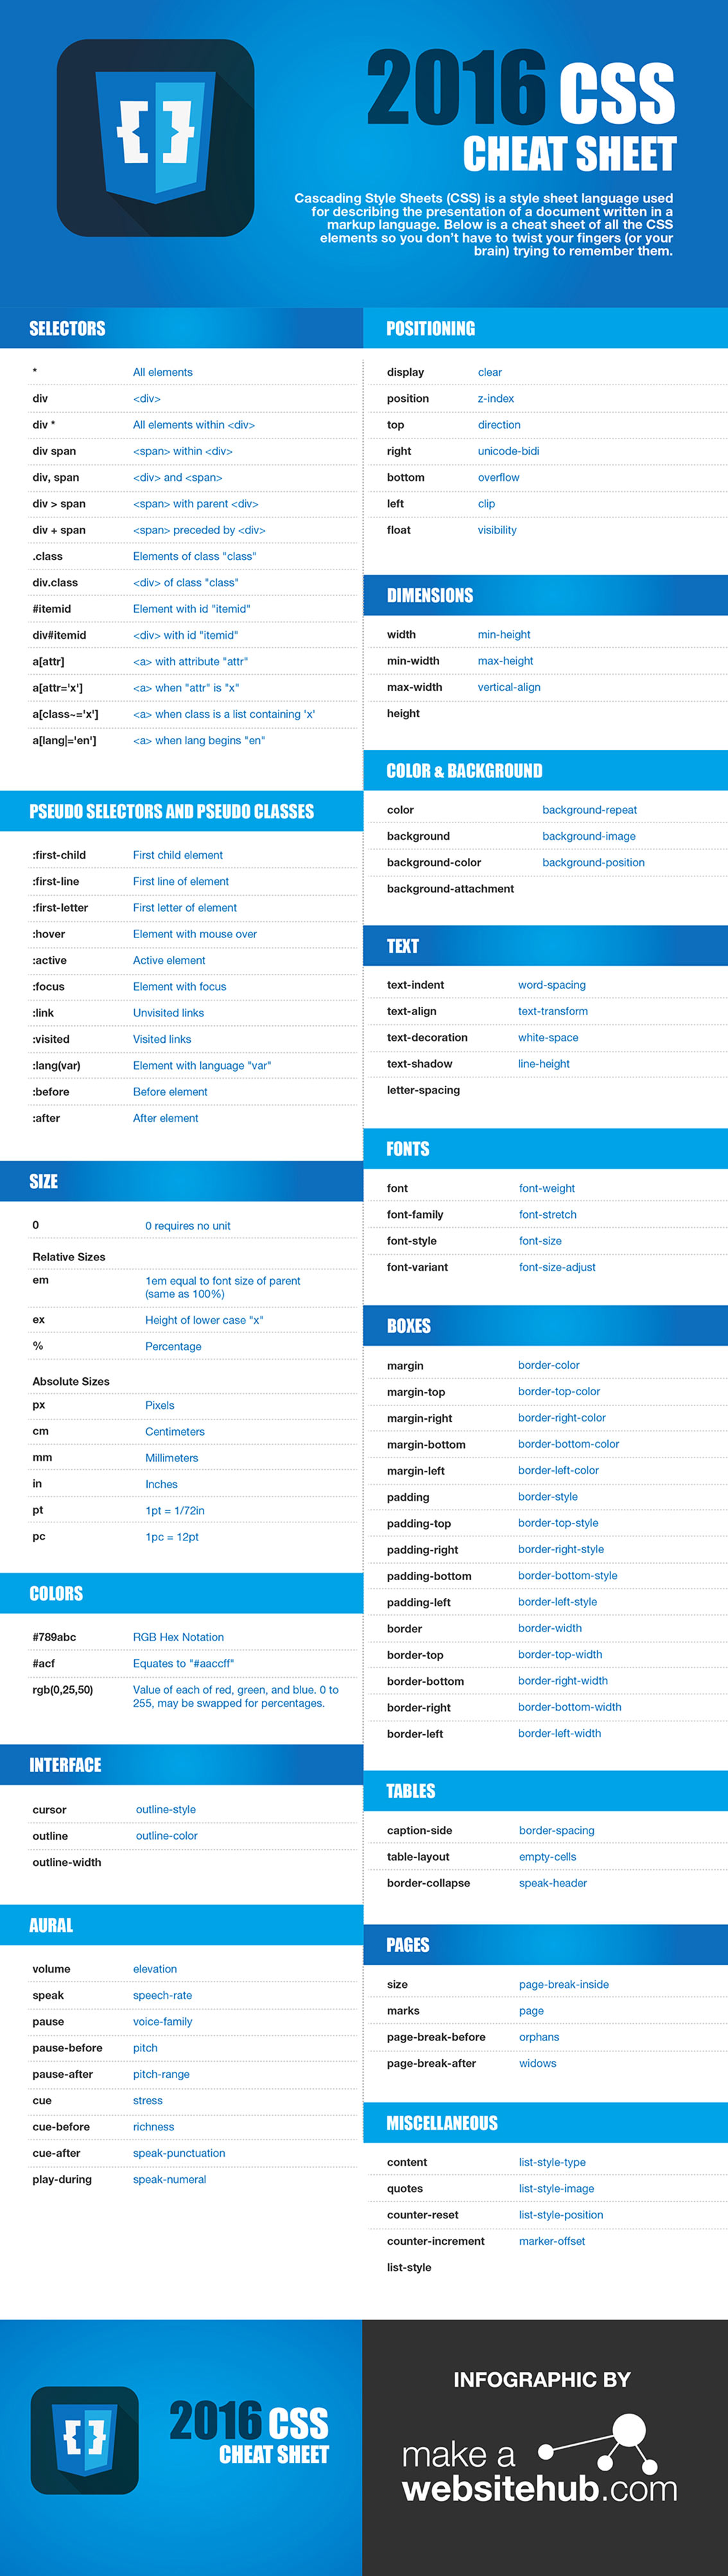 2016 CSS Cheat Sheet for Web Designer Infographic